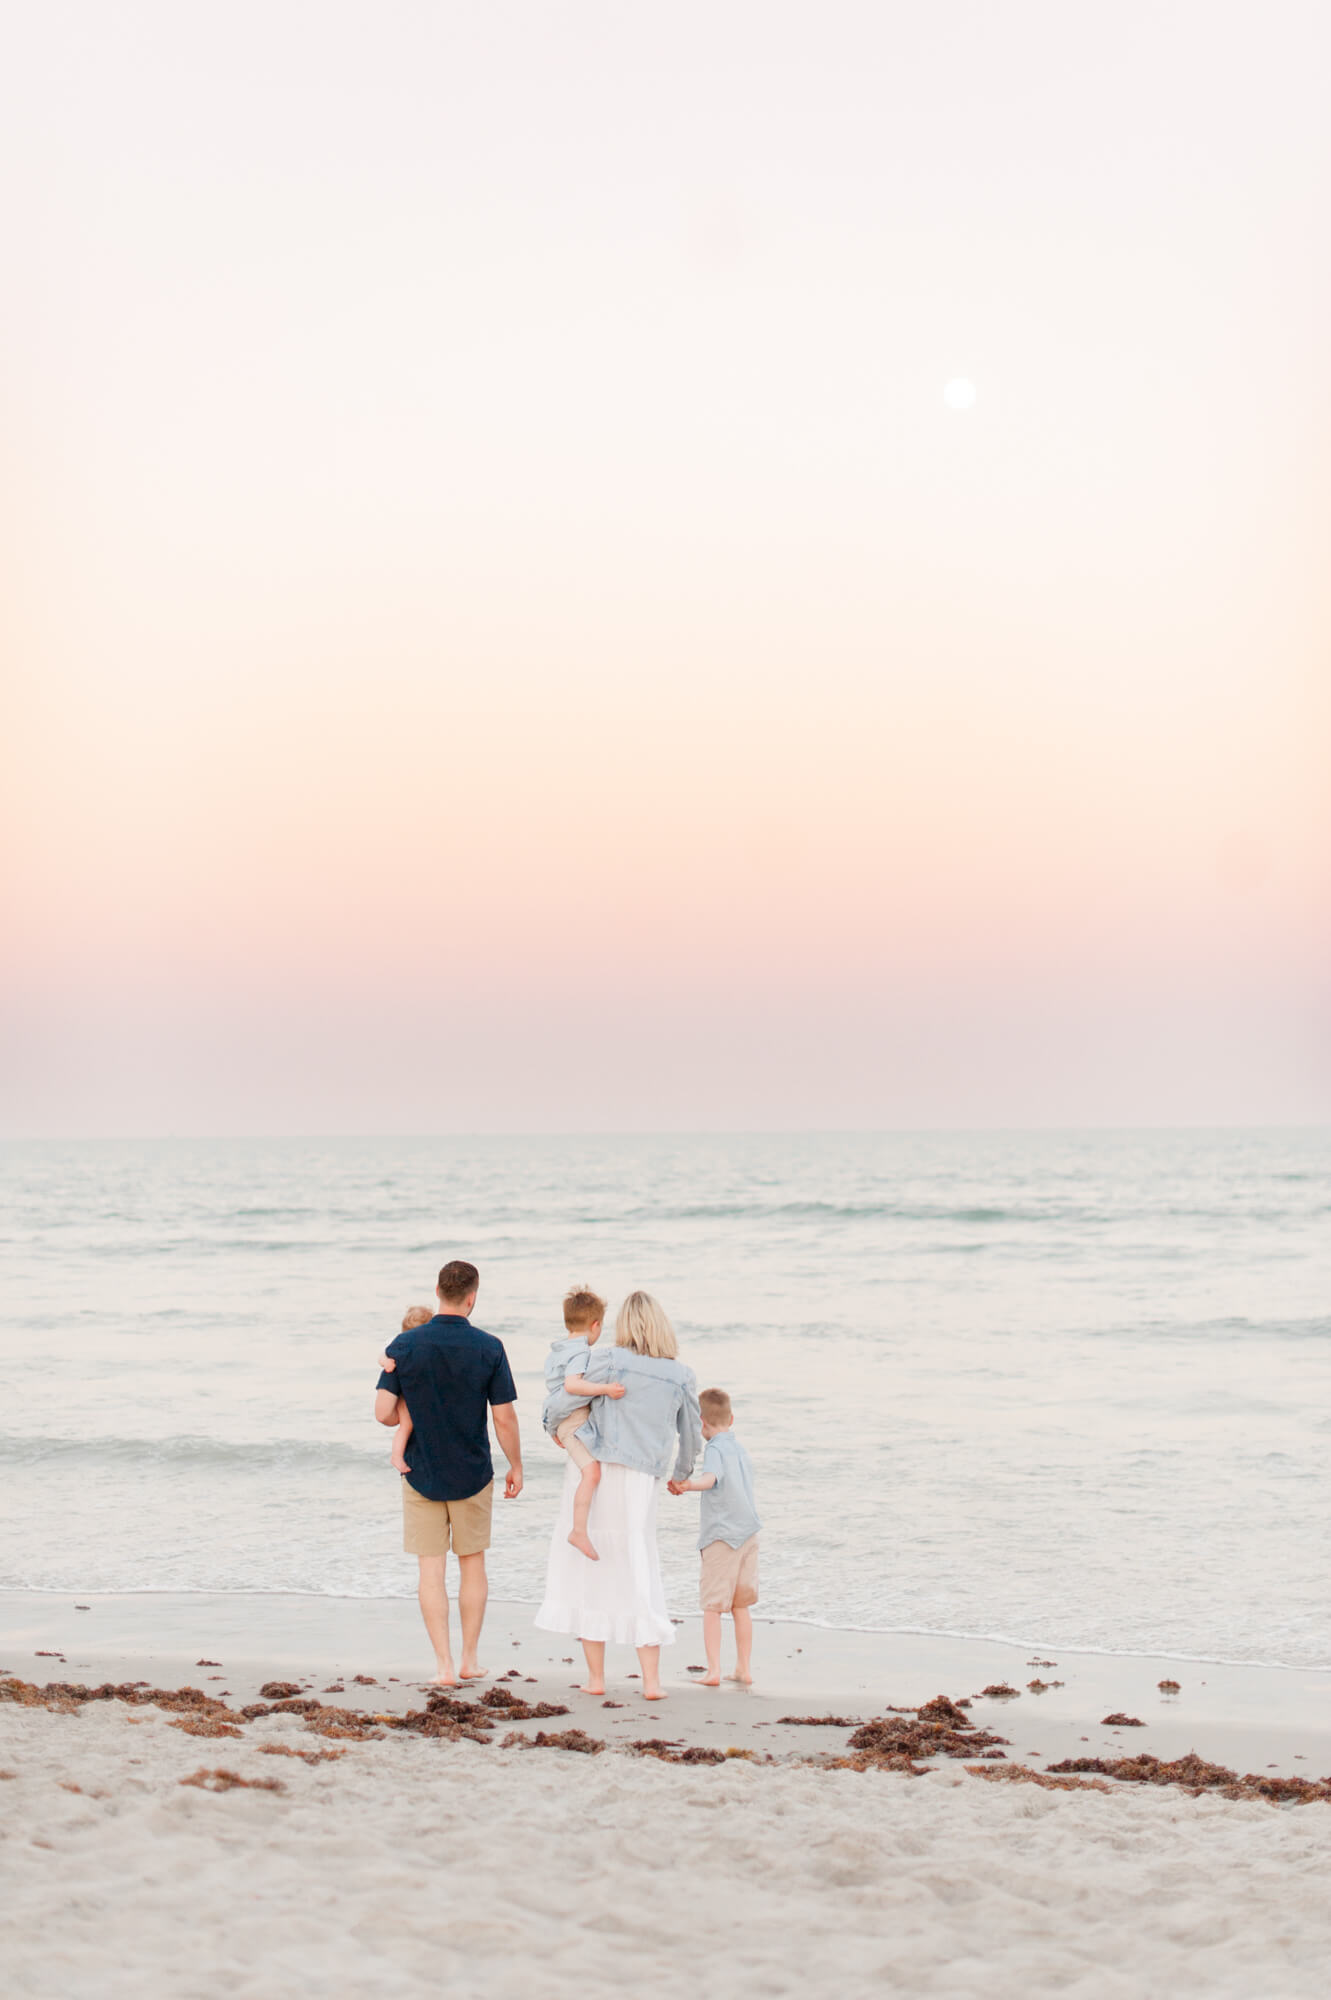 Stunning sunset image of a family of five down by the shore line watching the waves crash during golden hour in Cocoa Beach, Florida Viera Pediatric Dentistry